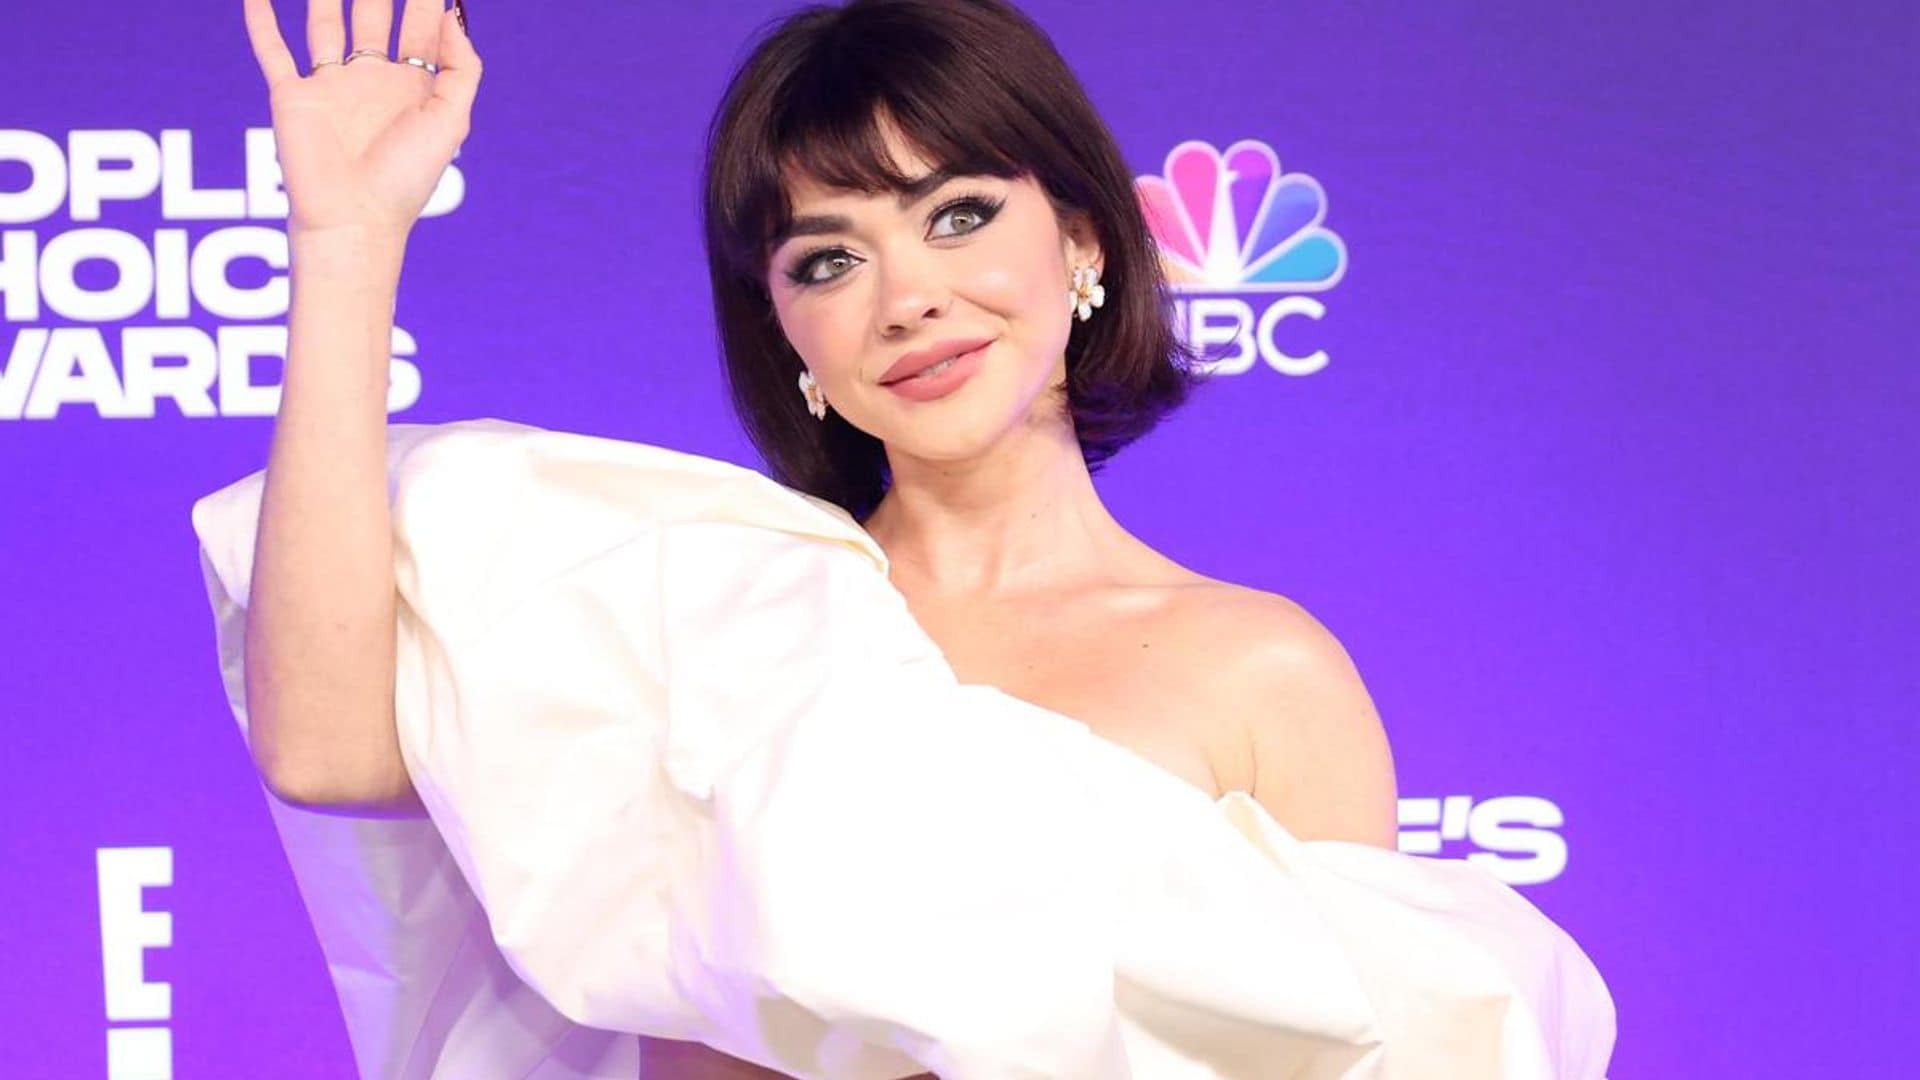 Sarah Hyland details difficult moments on the set of Modern Family: ‘I was reaching that certain level of sick’